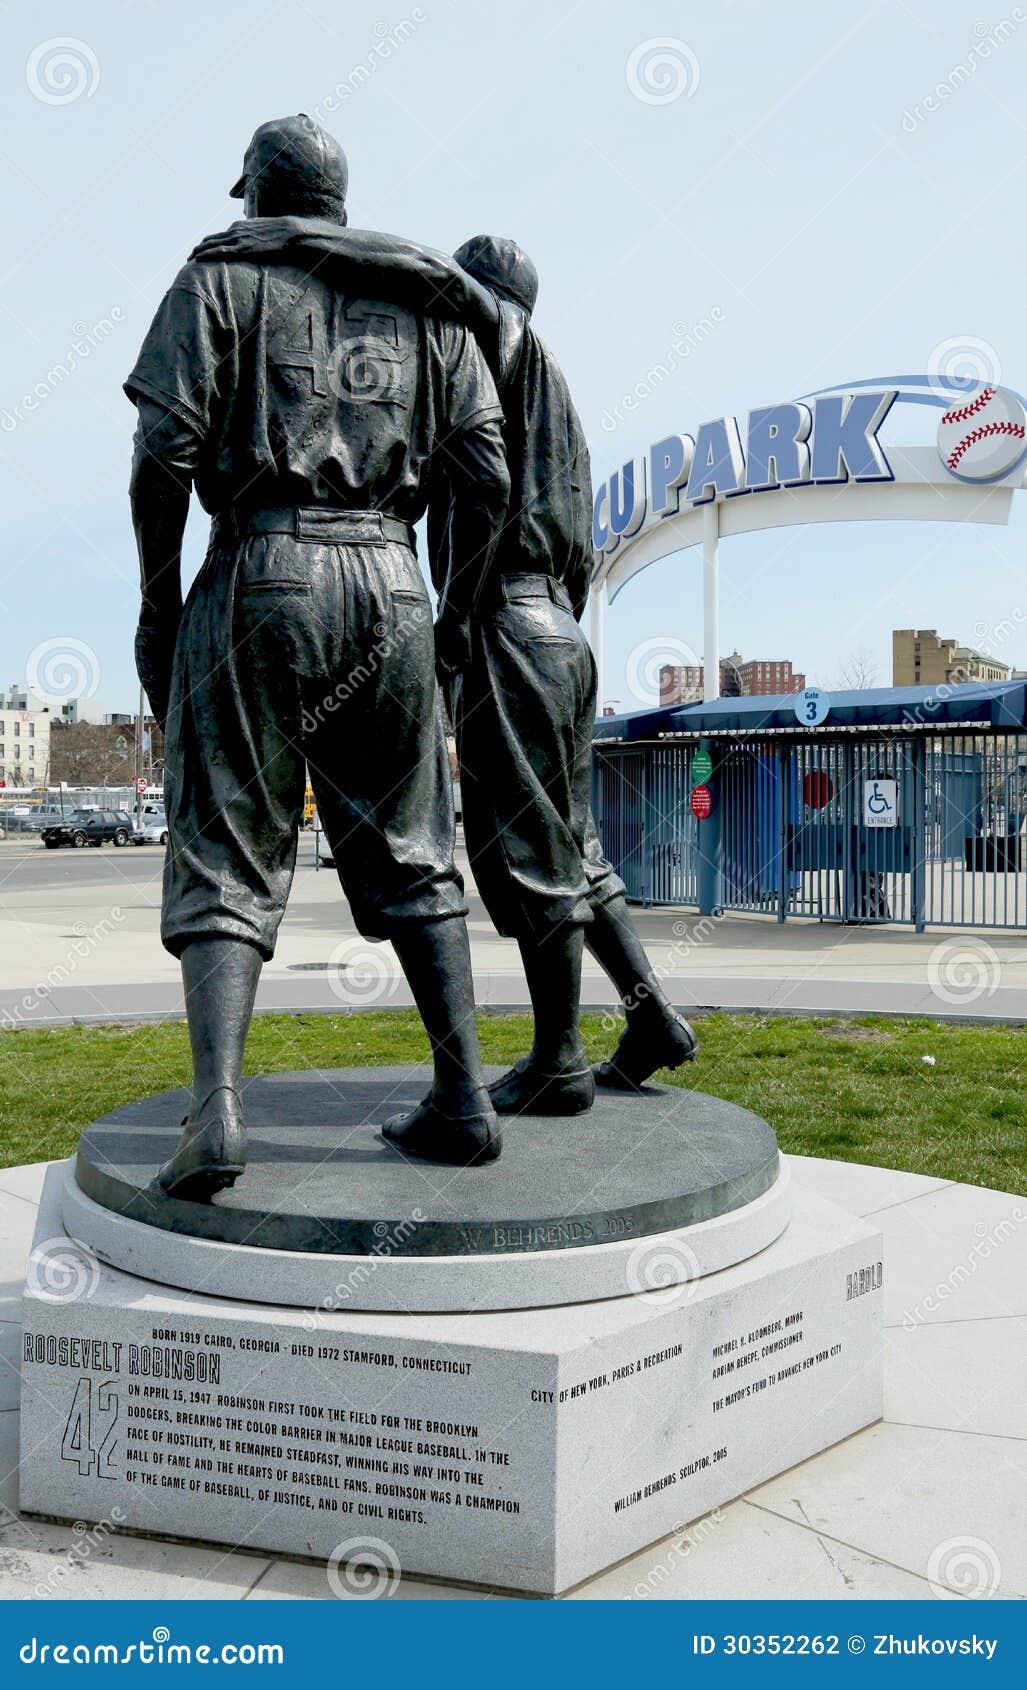 BROOKLYN, NY - APRIL 6: Jackie Robinson And Pee Wee Reese Statue In  Brooklyn In Front Of MCU Ballpark On April 6, 2013. 42 Is An Upcoming 2013  Hollywood Film About Baseball